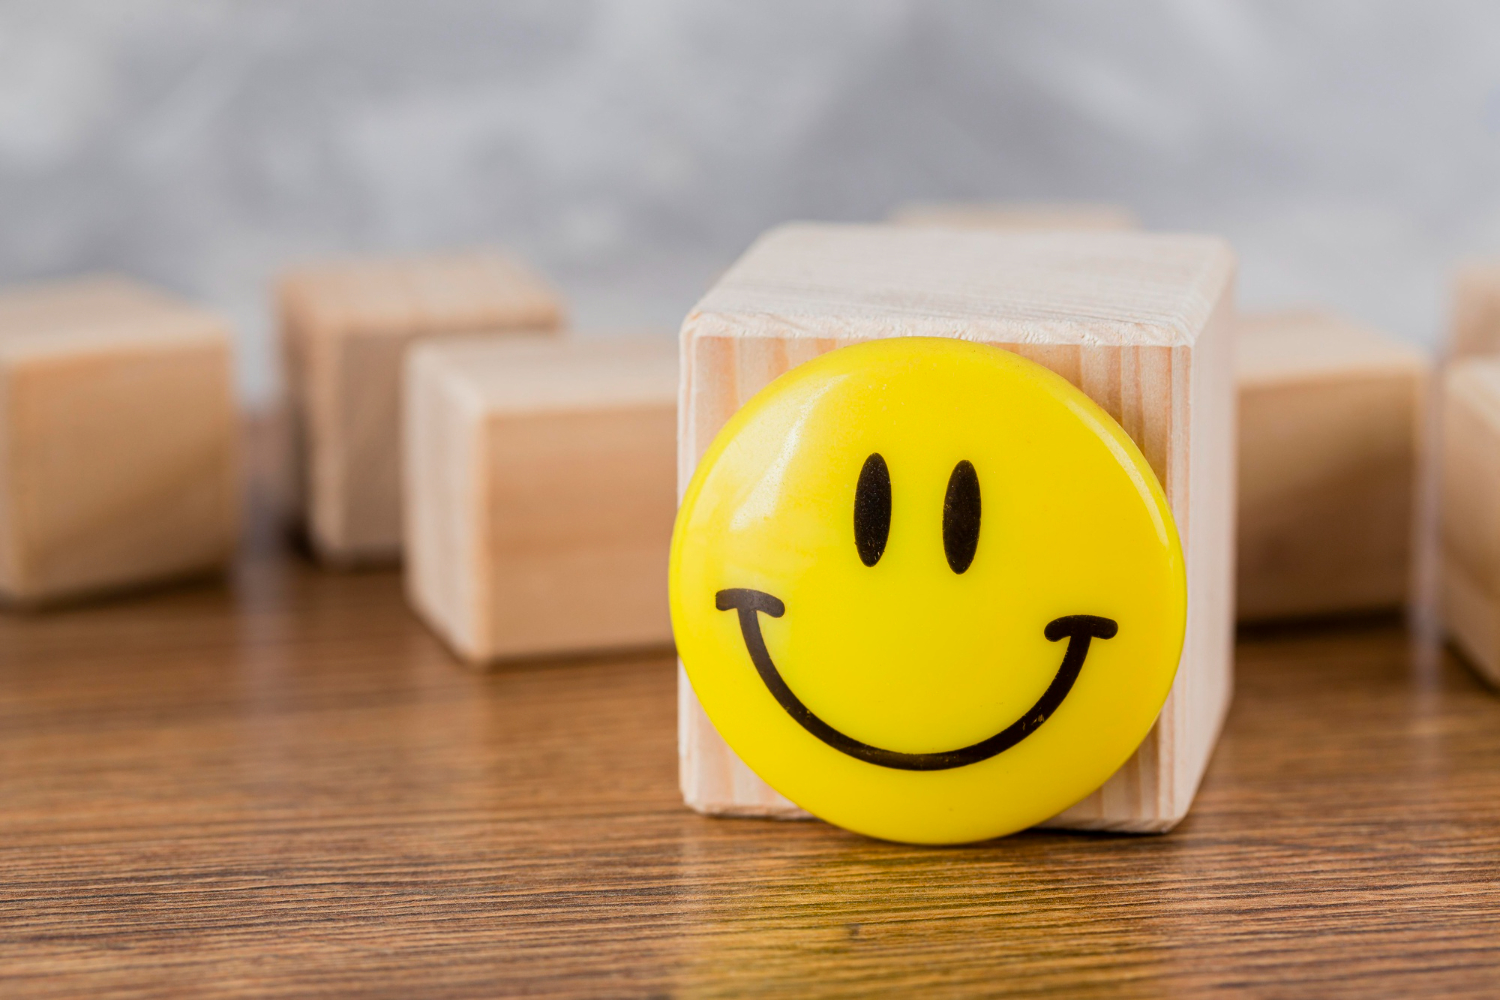 front-view-smiley-face-wooden-block